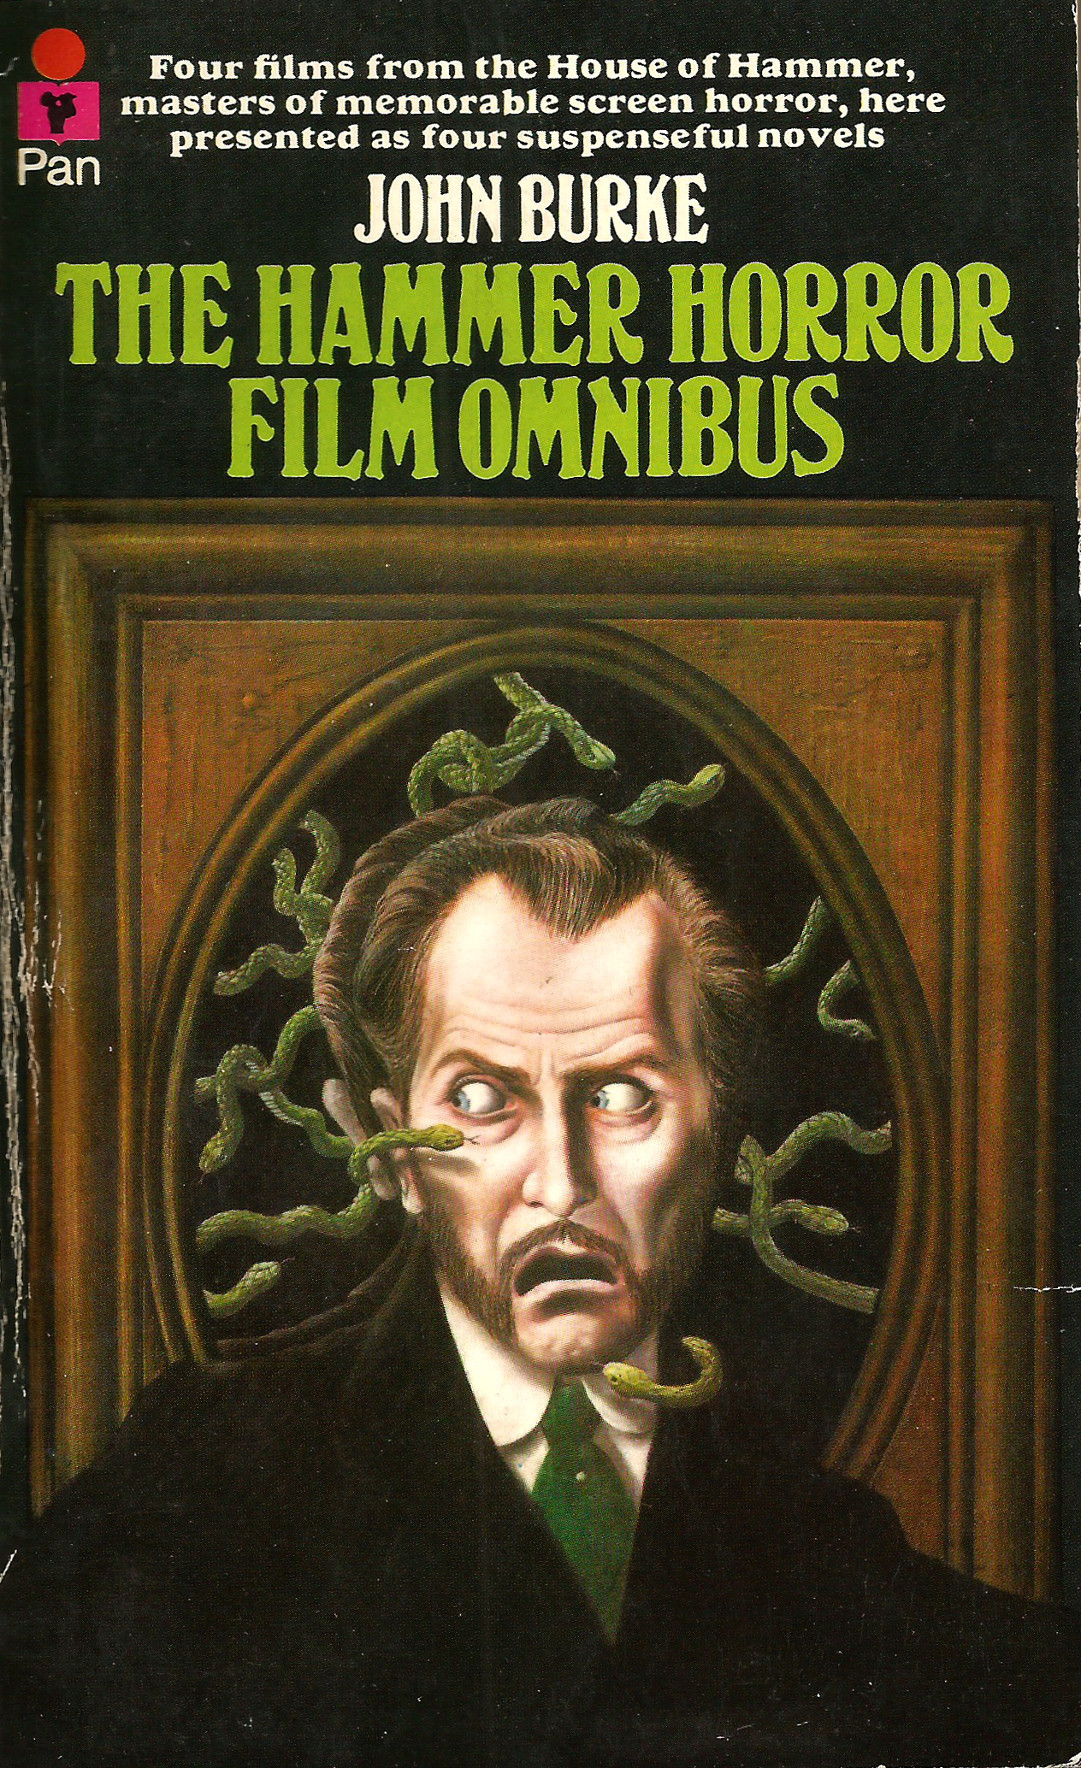 The Hammer Horror Film Omnibus, by John Burke (Pan, 1973). Contains The Gorgon, The